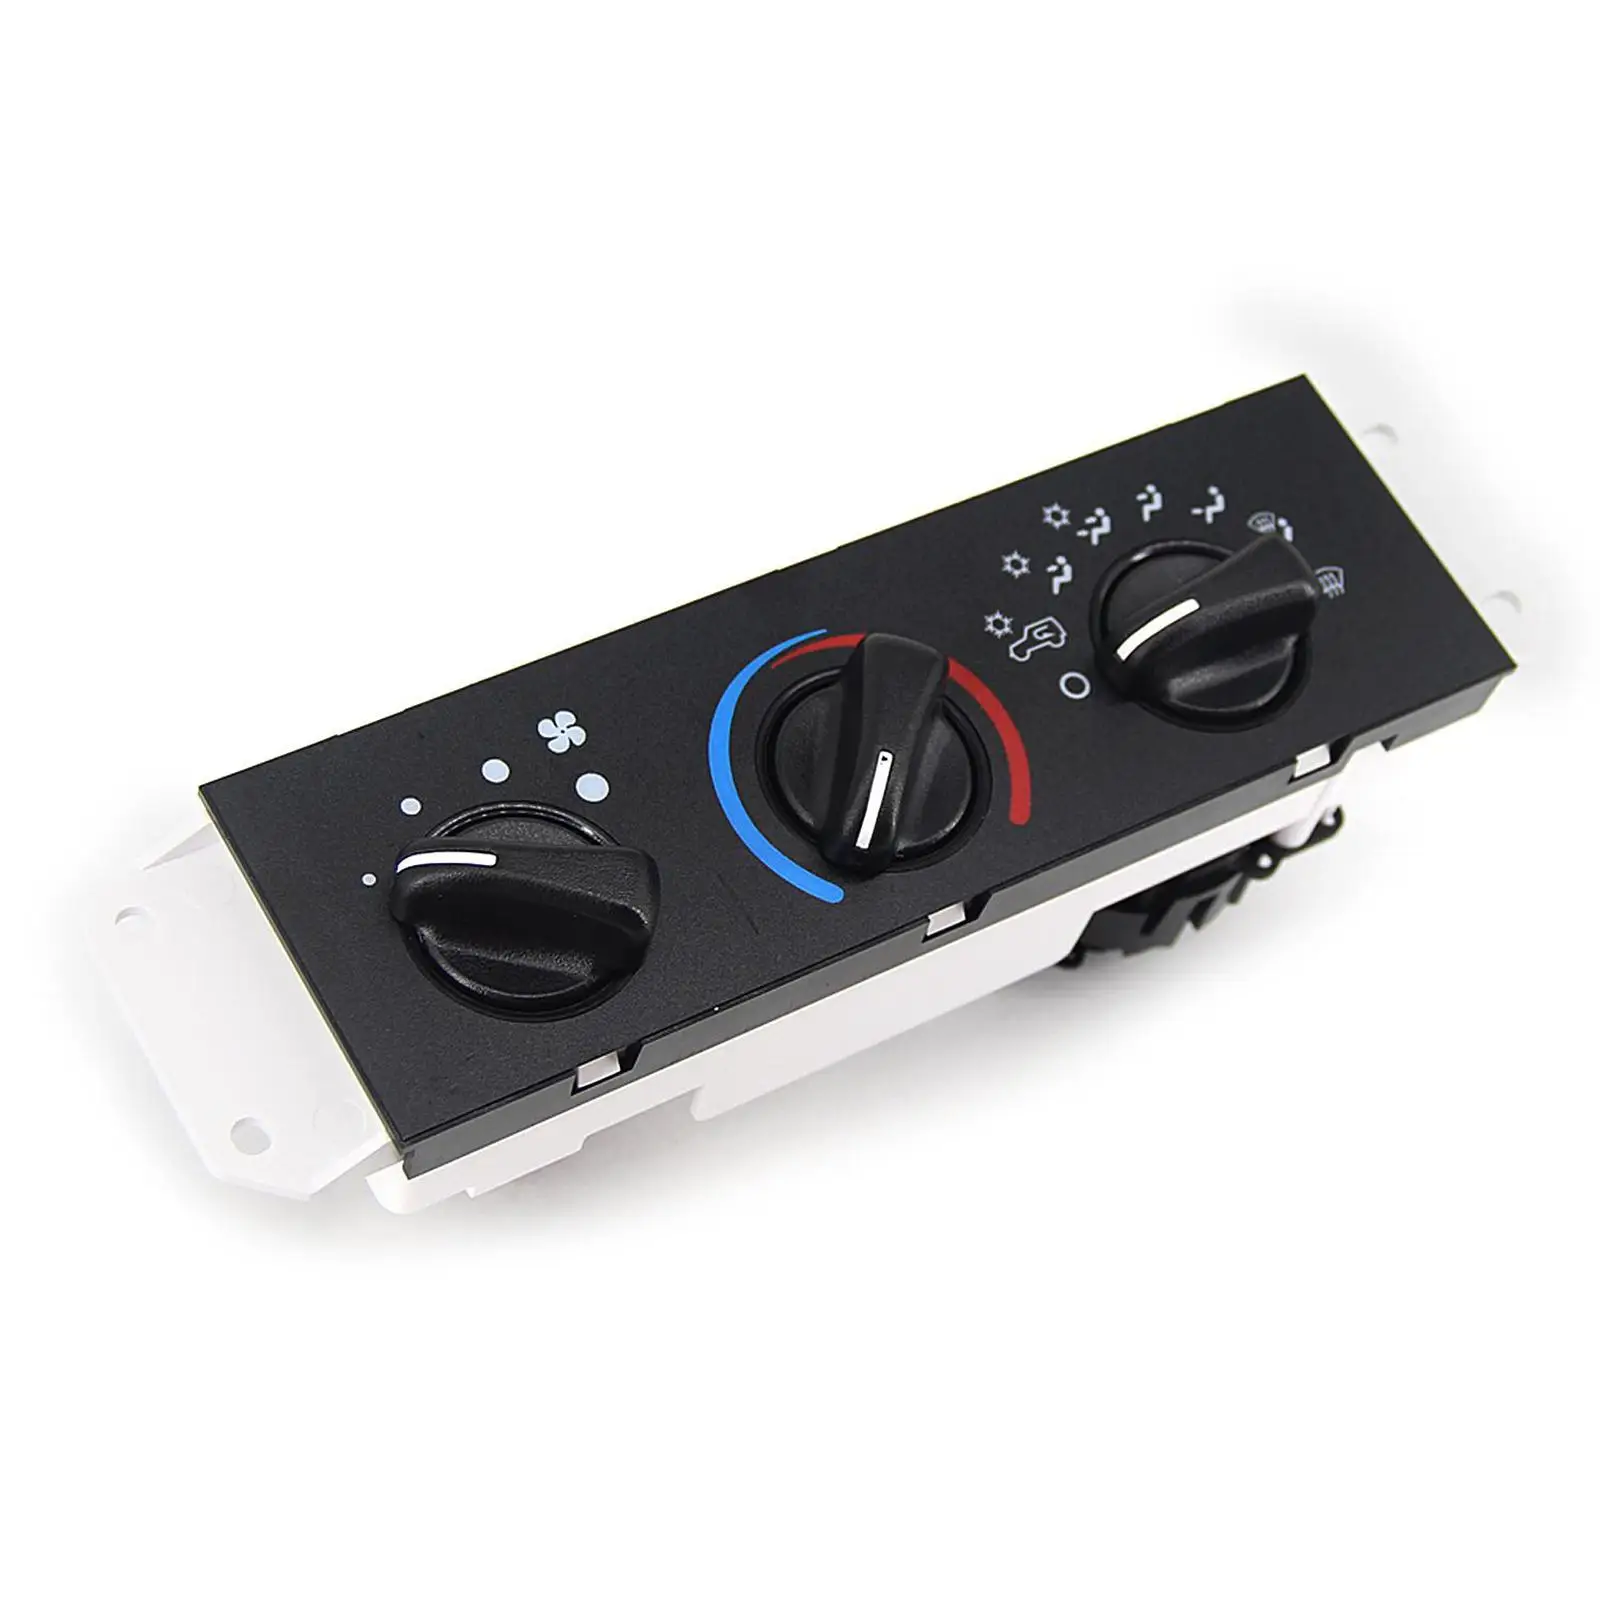 A/C Air Conditioning Heater Control Unit Panel Switch 999-01 2002-04, Replace your old, glitchy worn out 